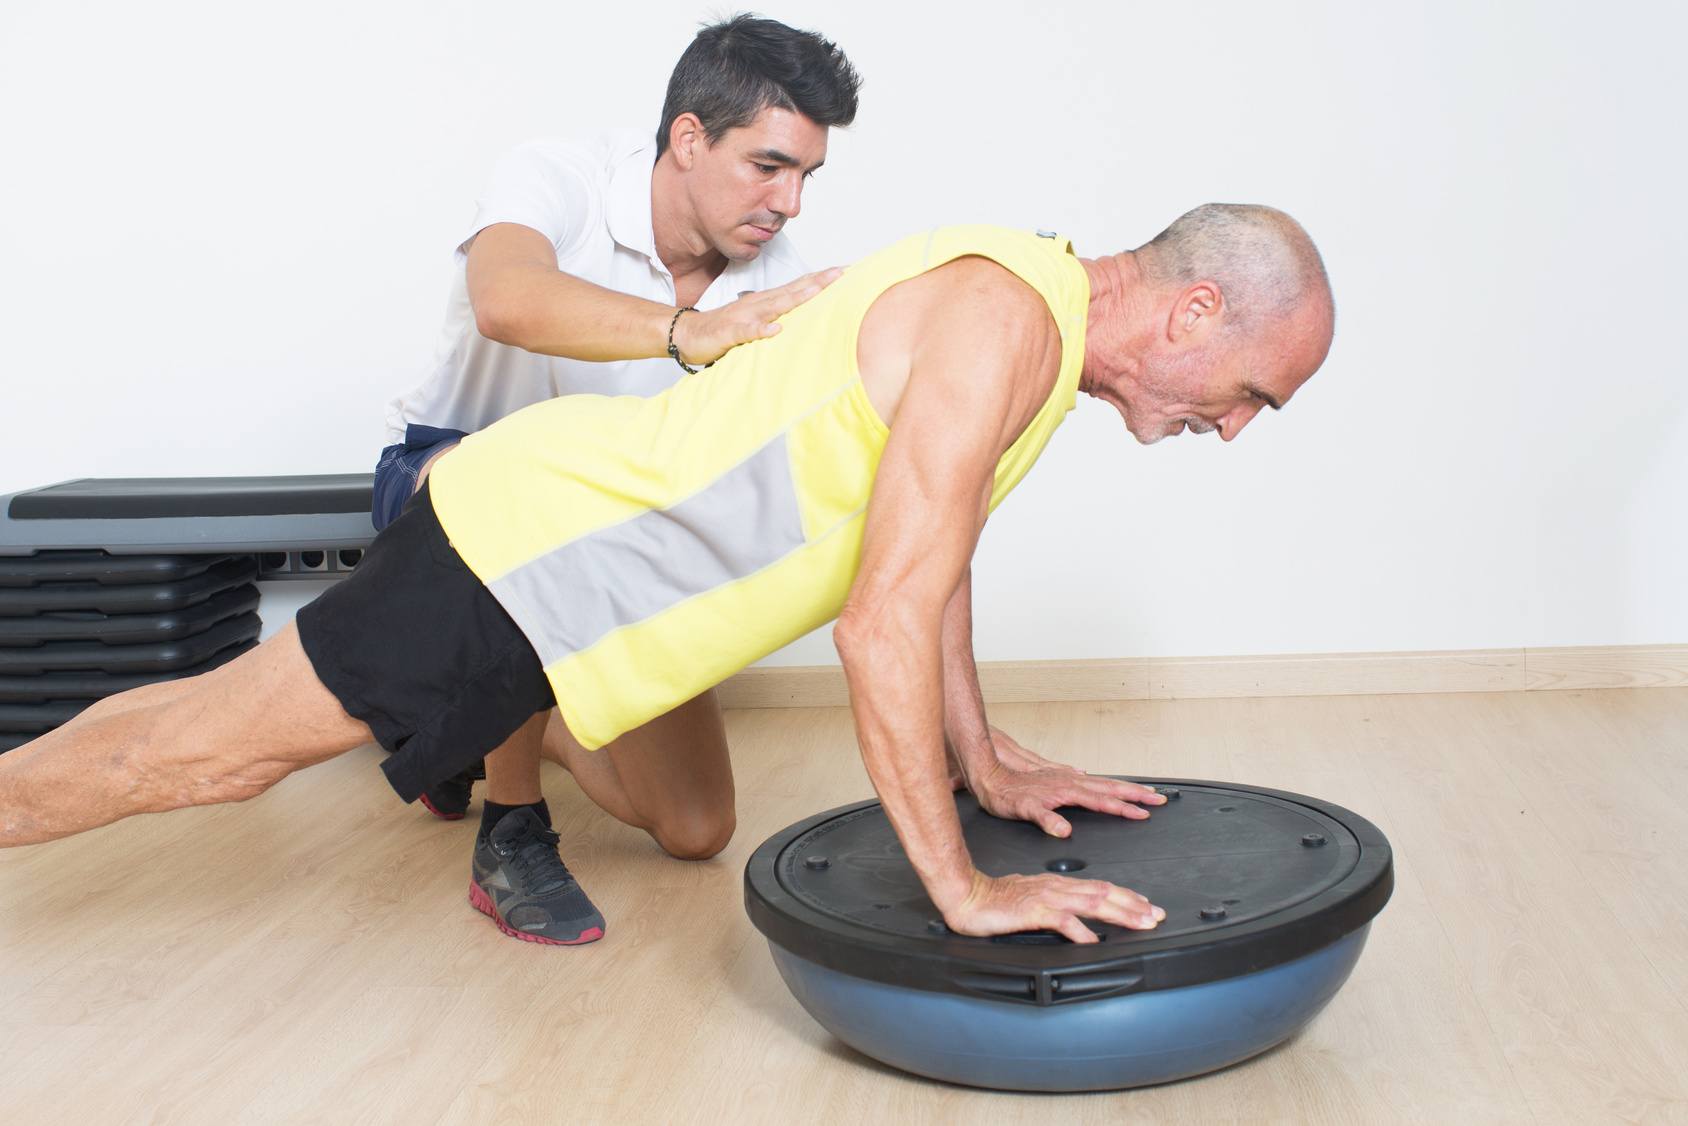 Are you looking for an exercise physiotherapist to improve core and balance for the elderly?